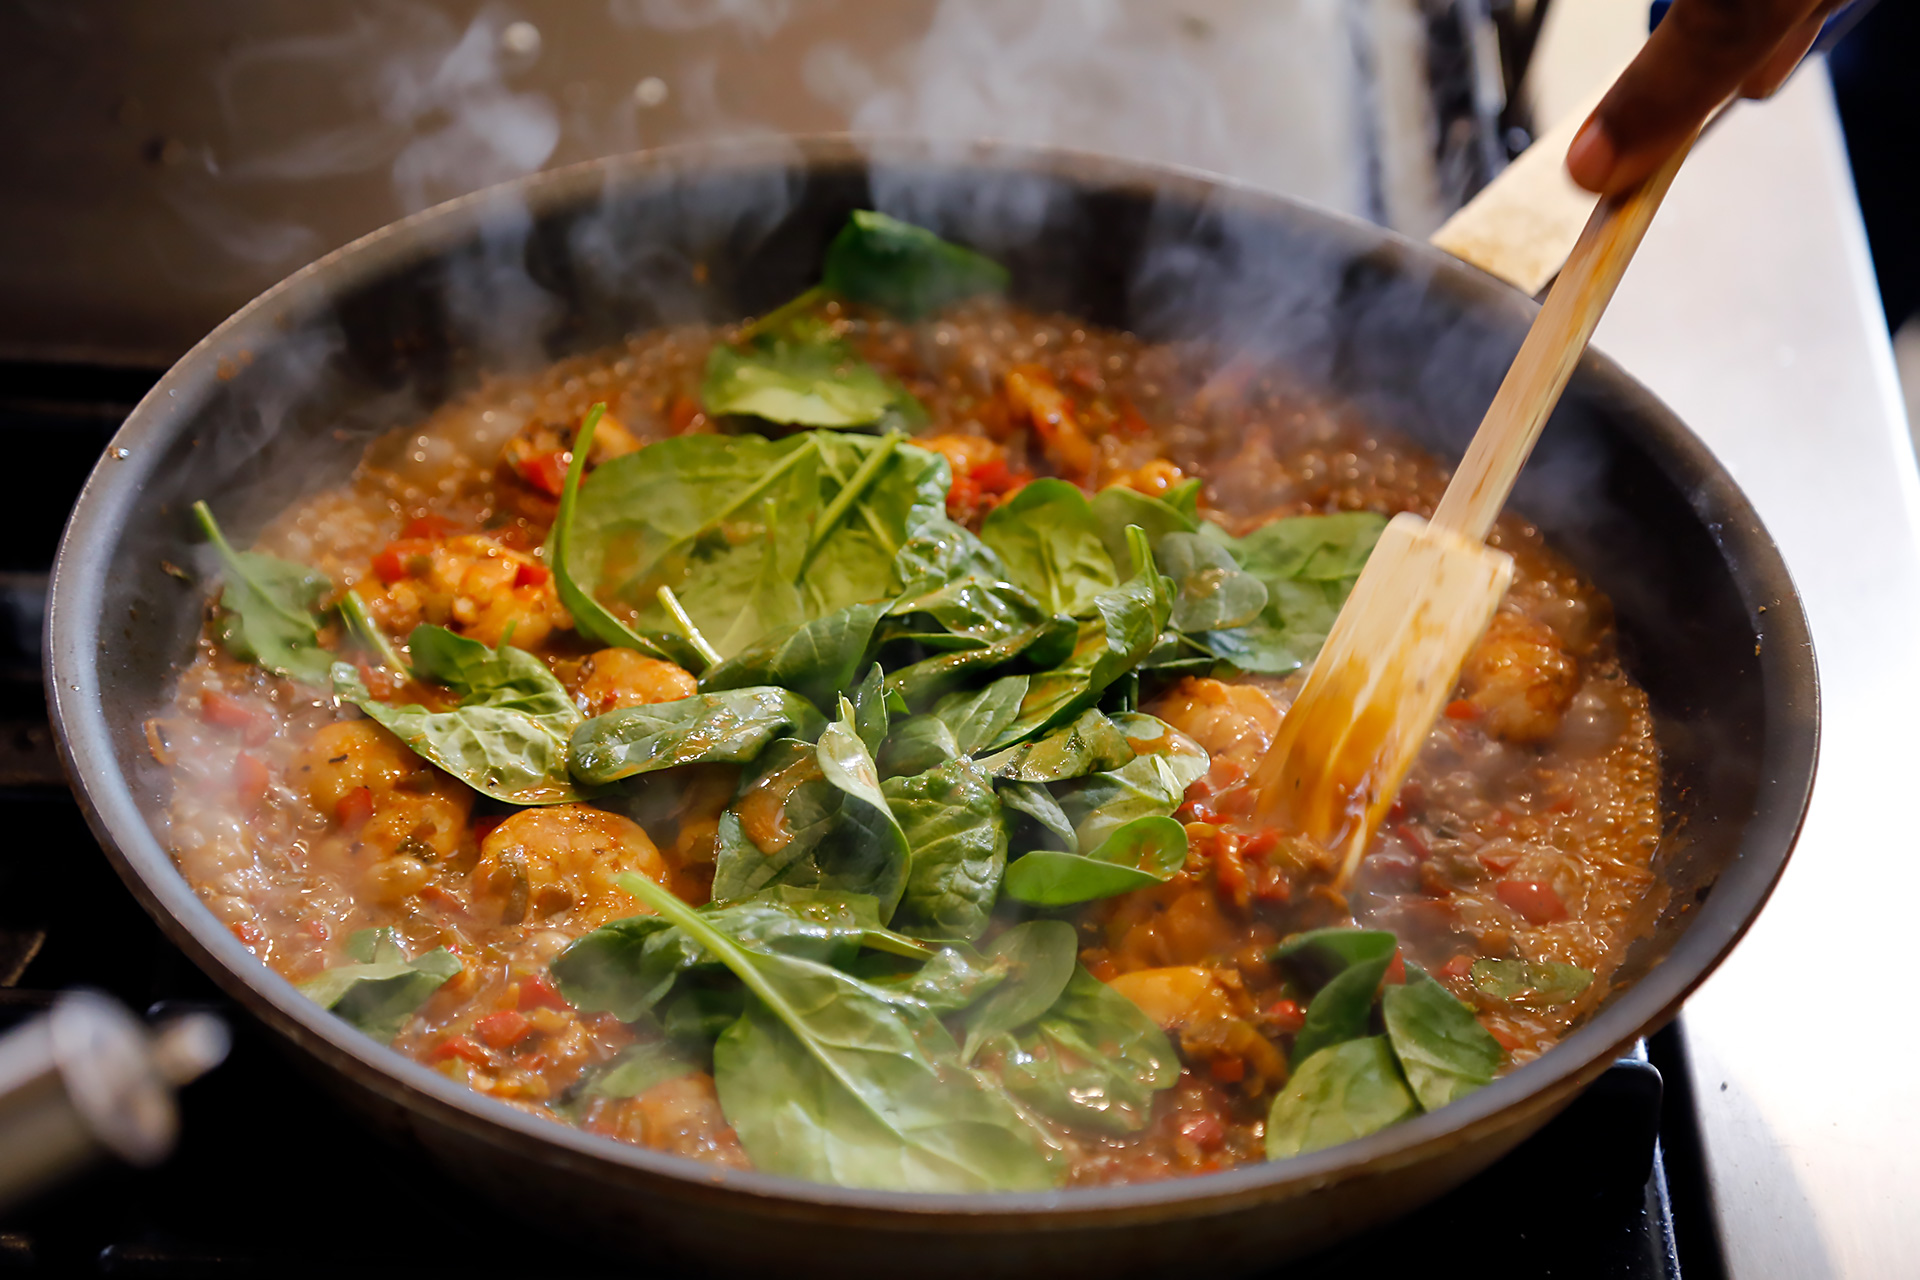 Stir to coat with sauce and wilt the spinach.